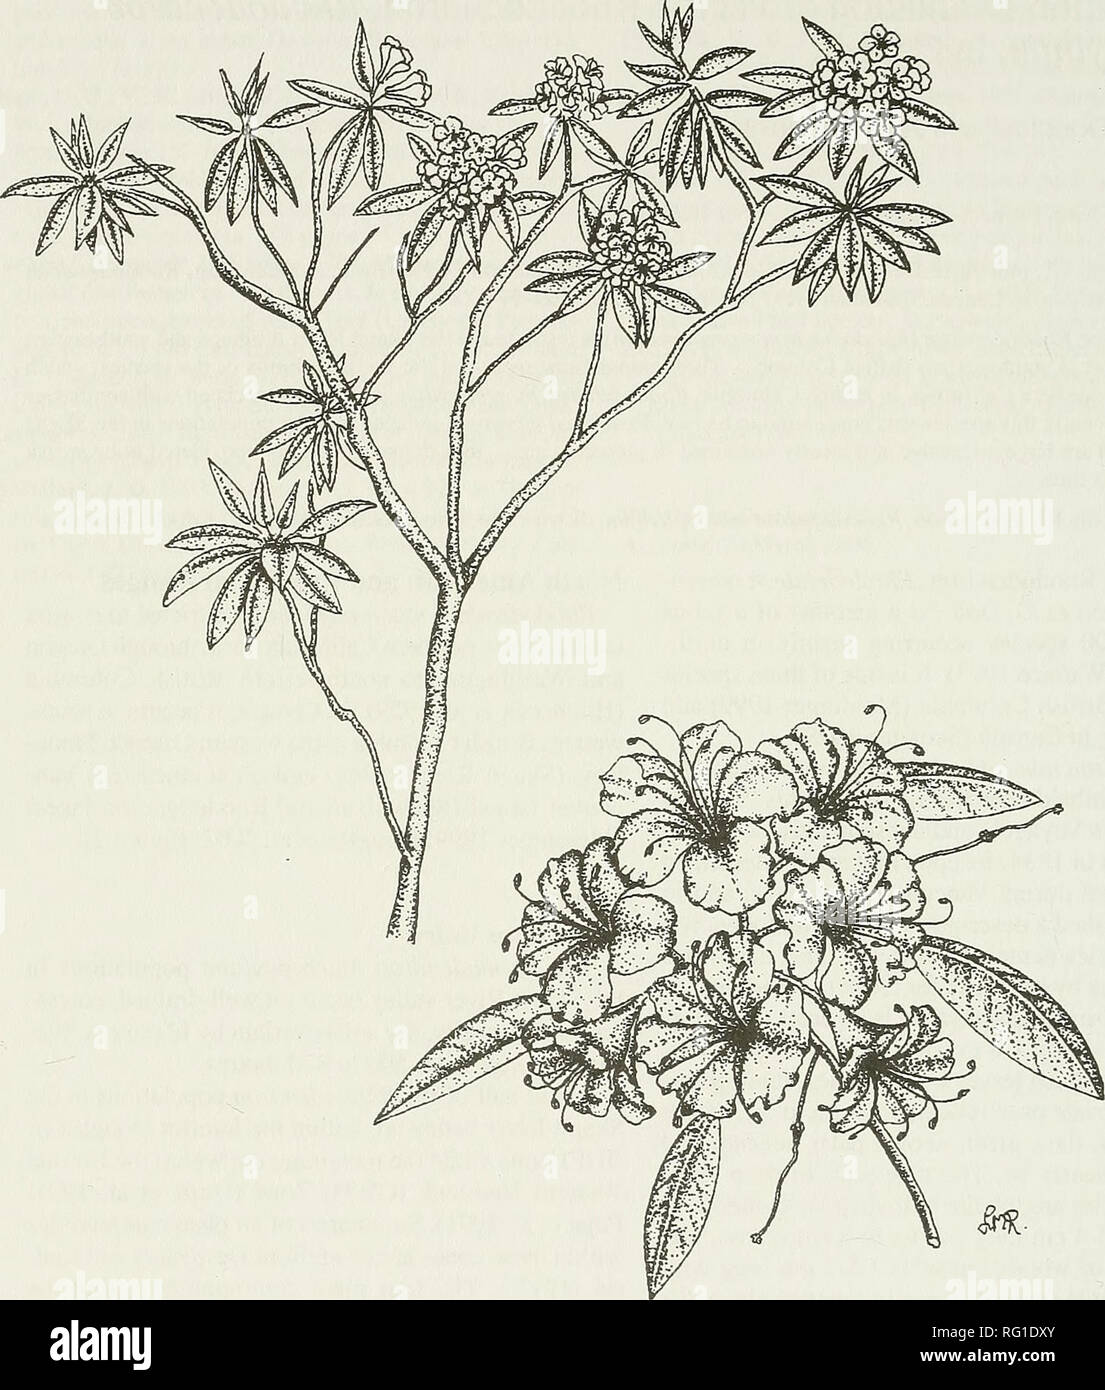 . The Canadian field-naturalist. Natural history; Sciences naturelles. 170 The Canadian Field-Naturalist Vol. 120. Figure L illustration of Rhododendron macrophyllum. (Line drawing by Lora May Richards) valley floor. These are the driest IDF sites and were mid-range in terms of their nutrient regime. The SO- US year old stands are dominated by Pseudotsuga menziesii, Paxistima myrsinites, and Pleurozium schre- beri. Other important species include Rhododendron macrophyllum, Lodgepole Pine (Pinus contorta), White Hawkweed {Hieracium albiflorum), Heart-leaved Tway- blade (Listera cordata) and Cow Stock Photo